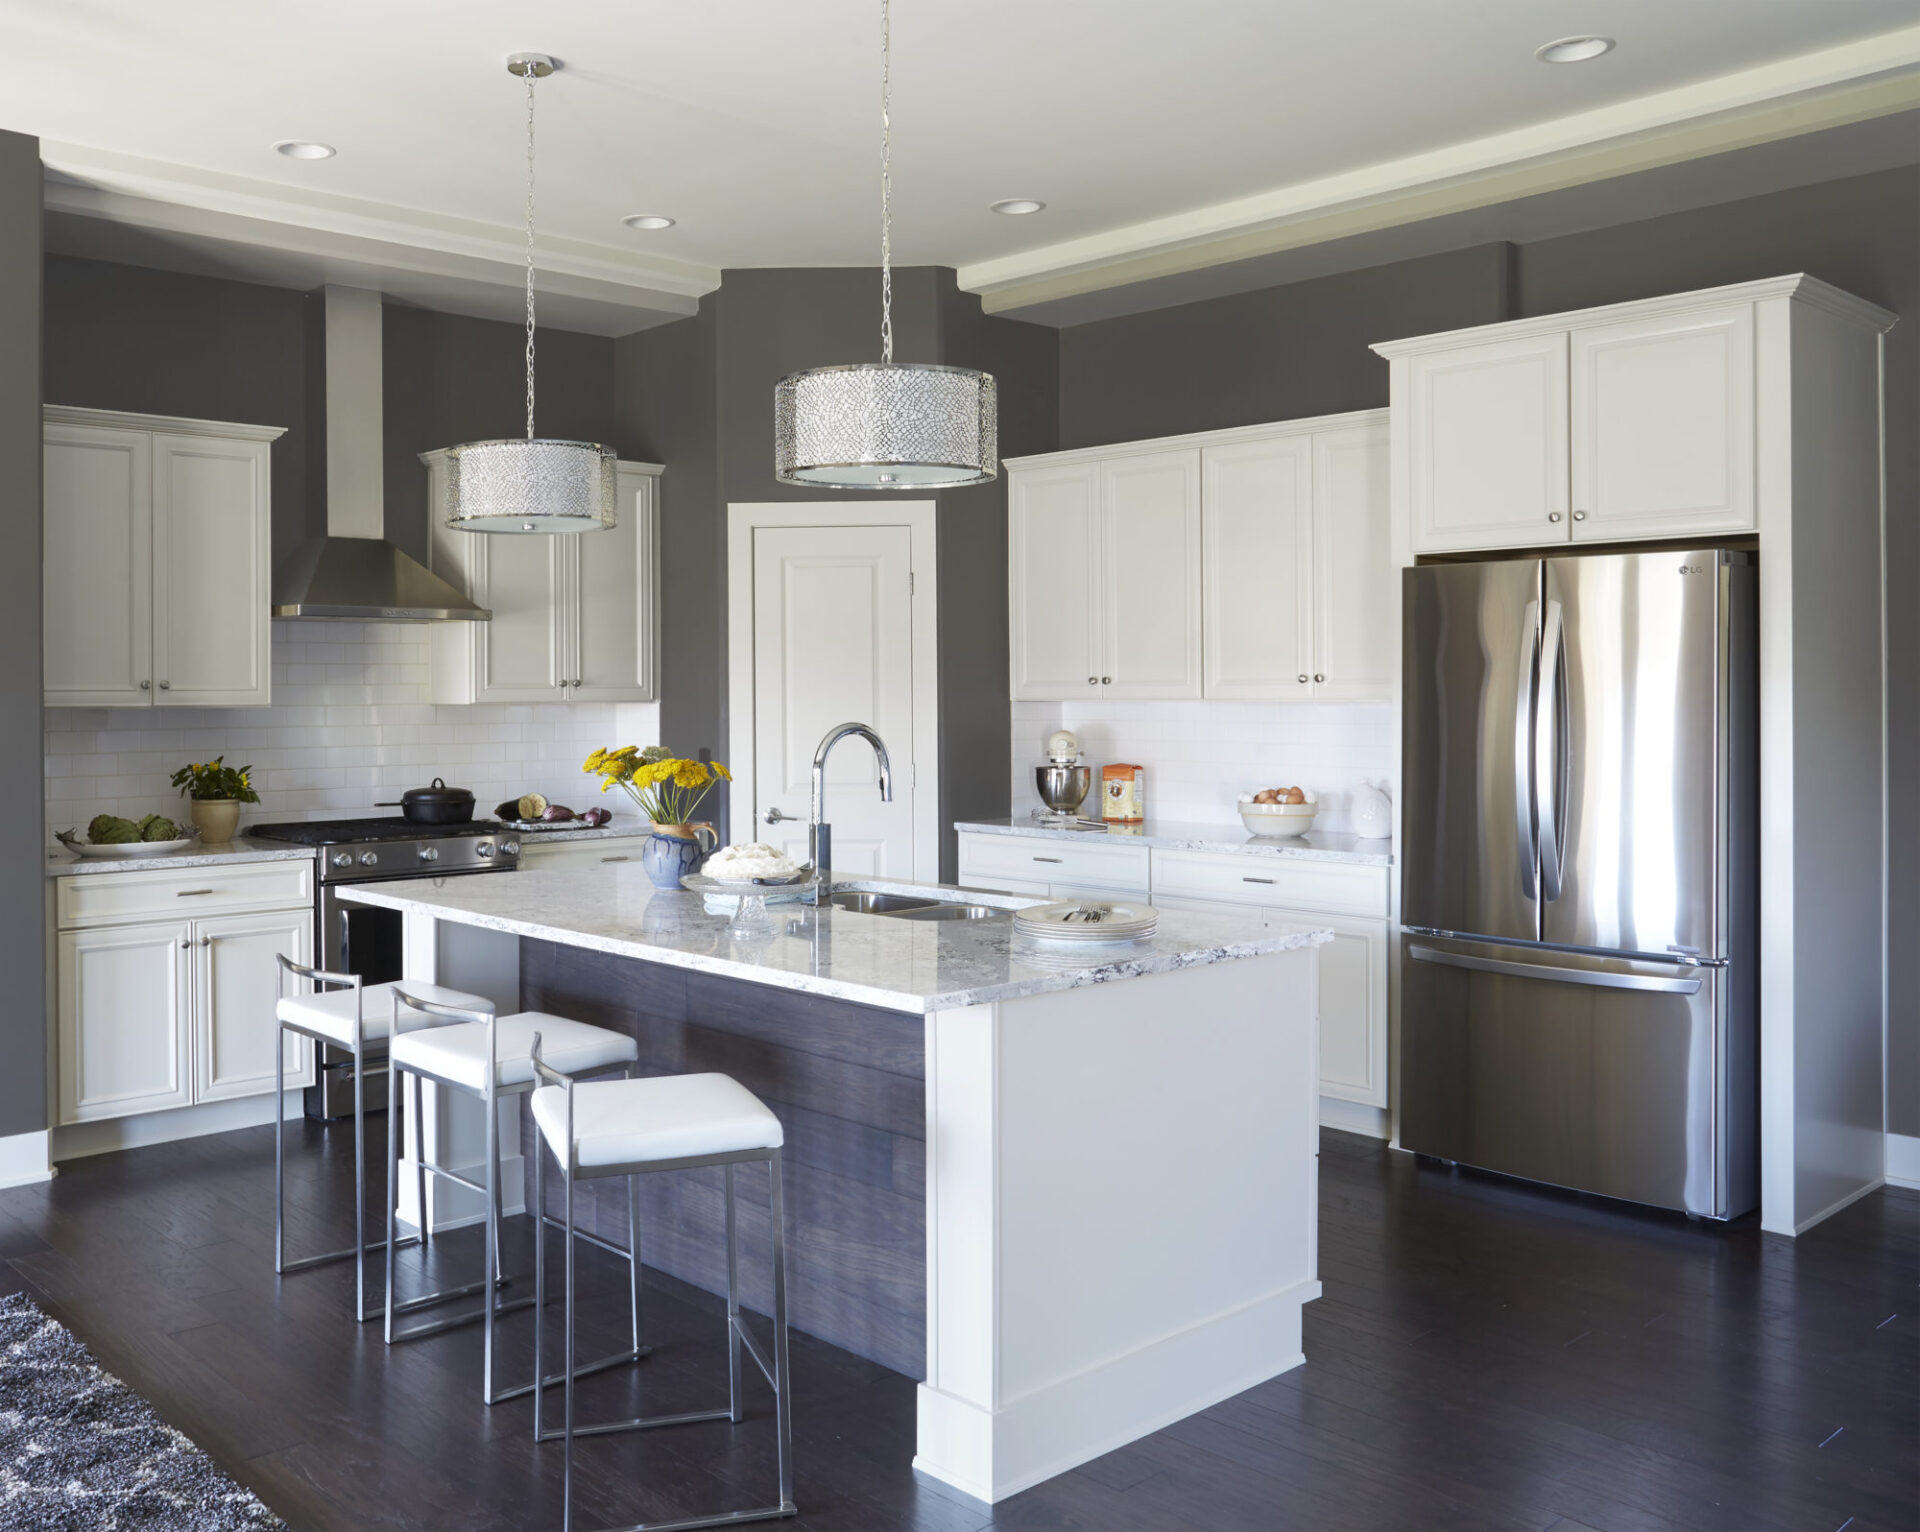 Cabinet Refacing: A Cost-Effective Makeover for Your Home